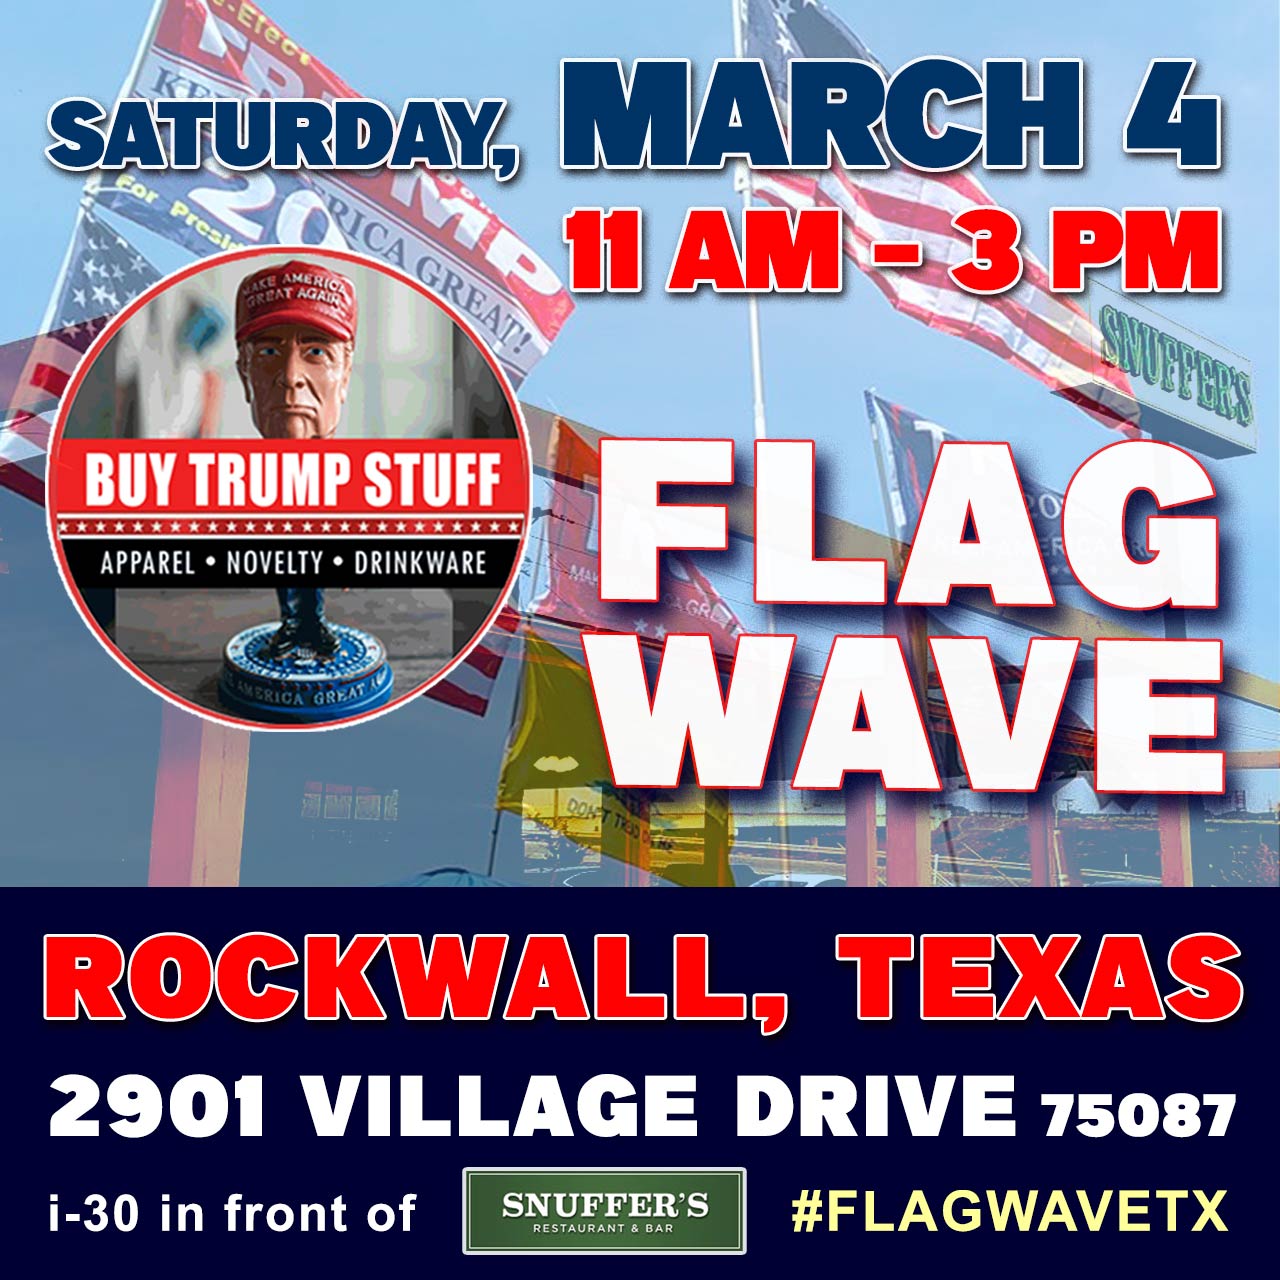 FLAG WAVE in ROCKWALL, TX - Sat., March 4th, 2023 in front of Snuffer's Restaurant located at 2901 Village Drive. #WWG1WGA #FLAGSOUT #FLAGWAVE #TEXASTODO